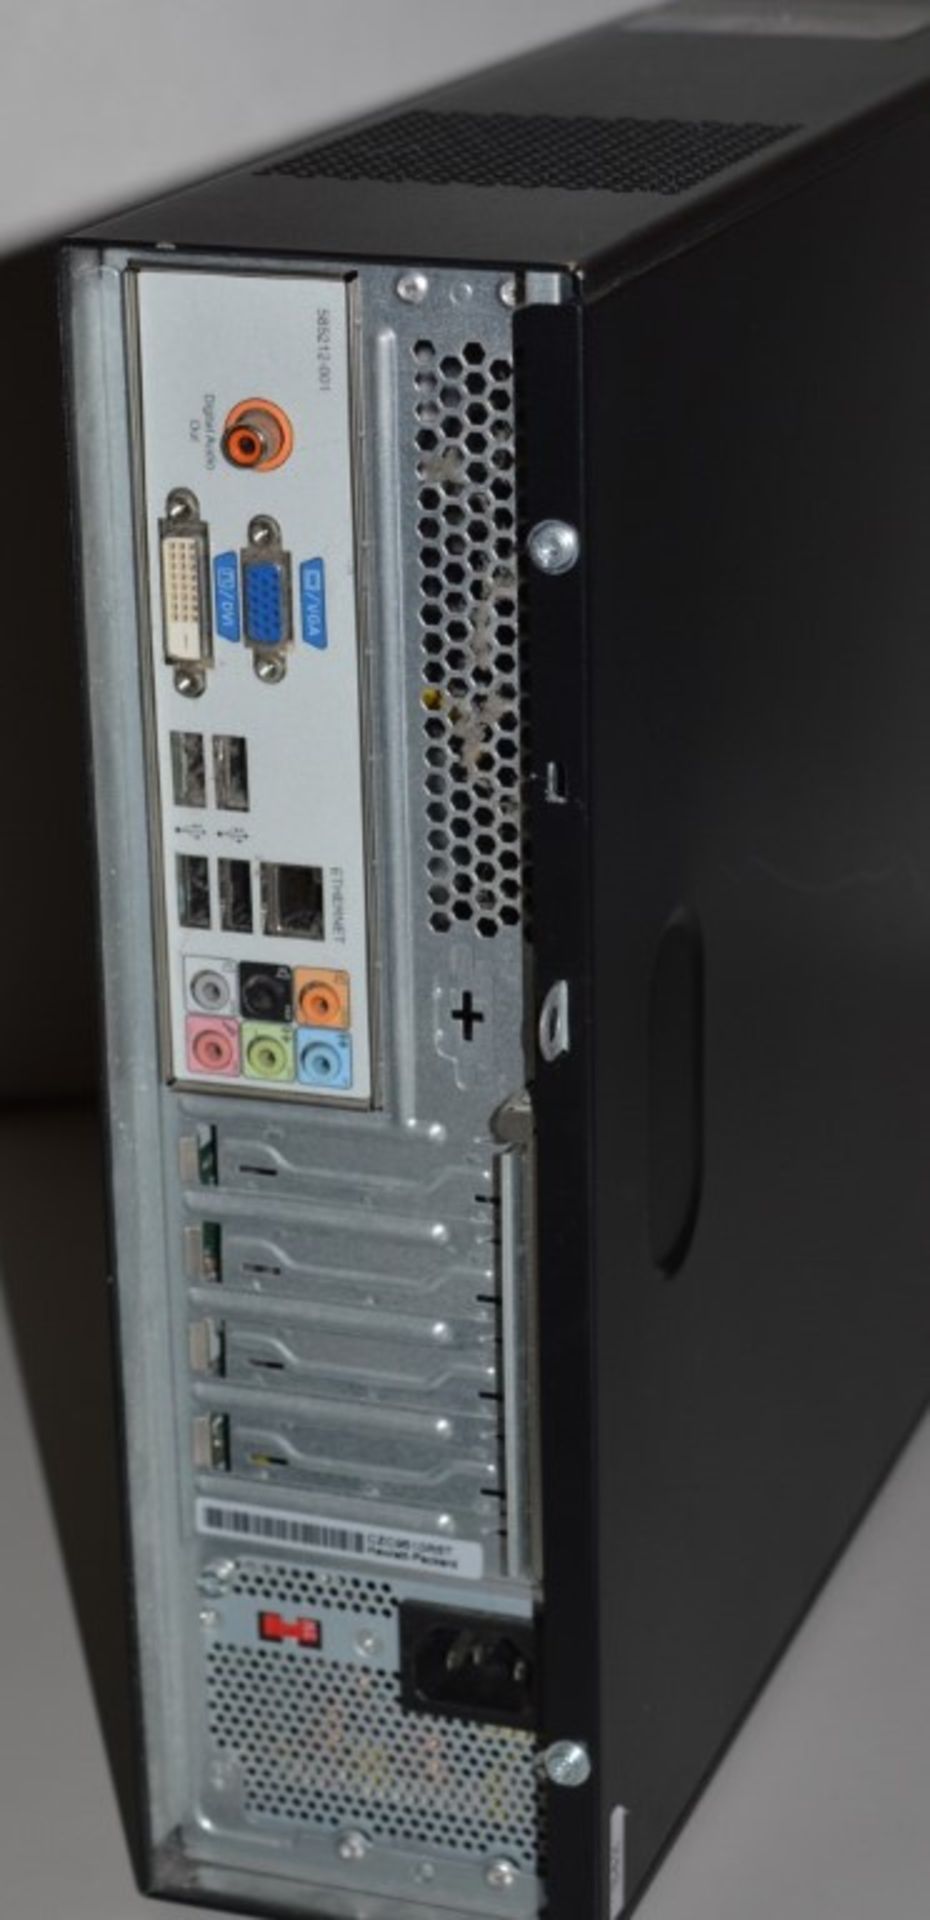 1 x HP Pro 3010 Small Form Factor PC - Features Intel Core 2 Duo 2.9ghz Processor, 4gb DDR3 Ram, - Image 2 of 3